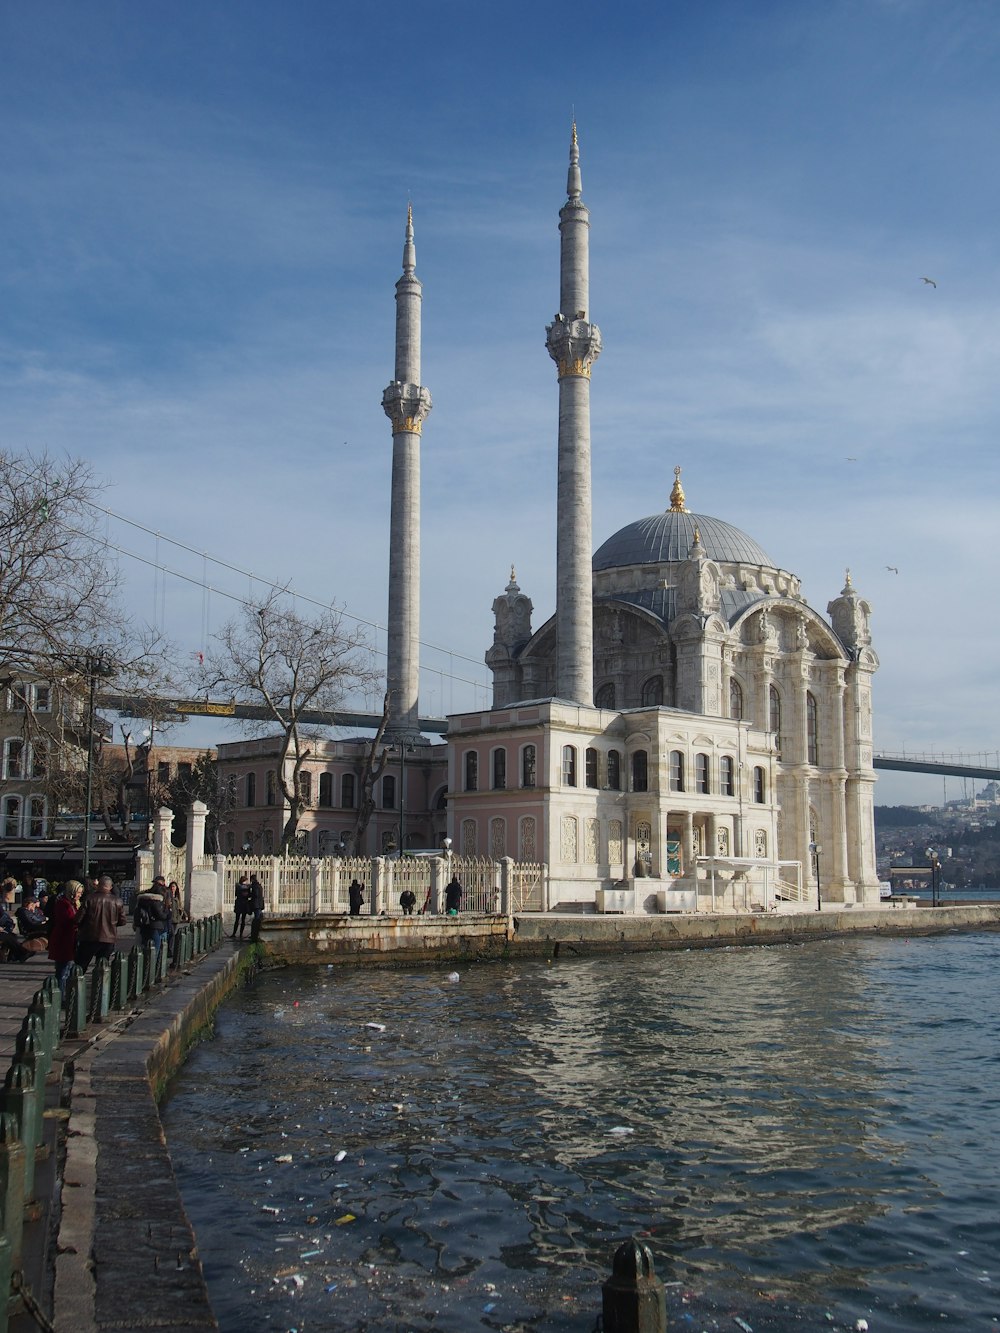 a building with a dome and towers by a body of water